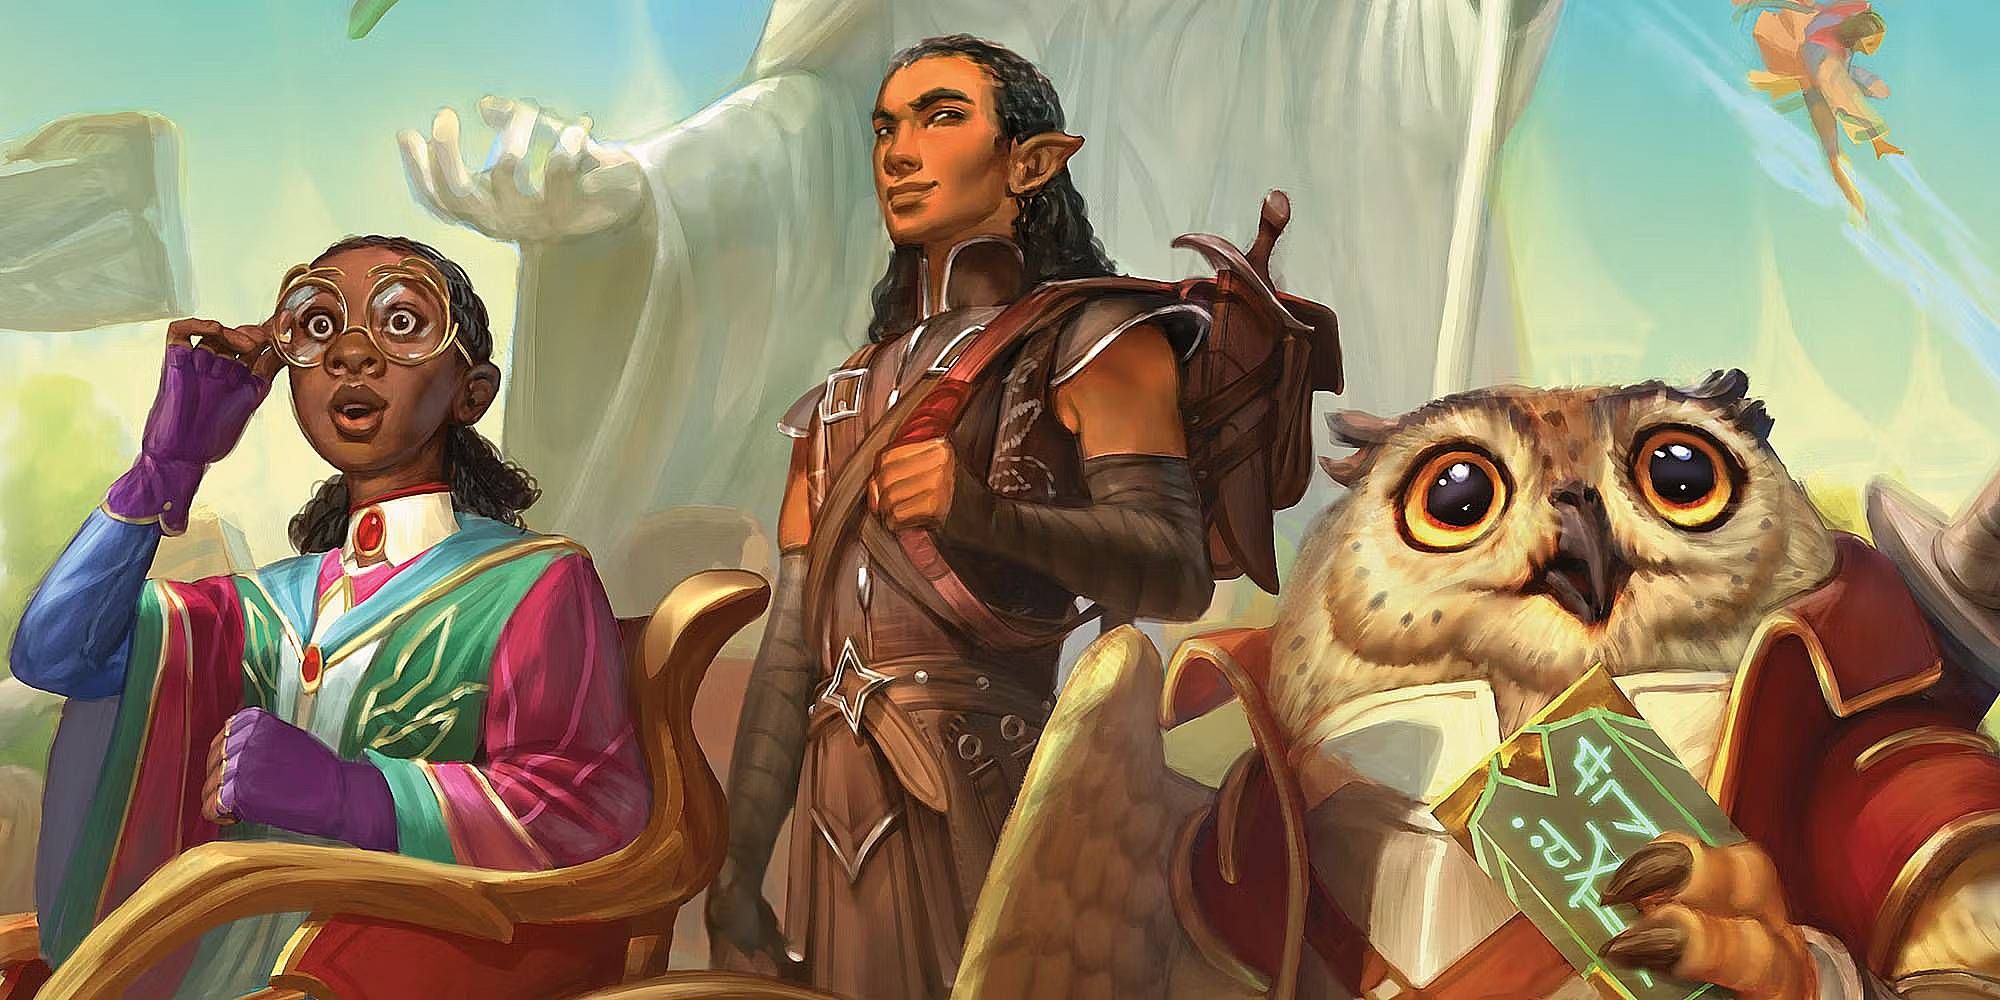 A dark skinned girl in glasses, a tanned elven man and an owlin all look around in amazement